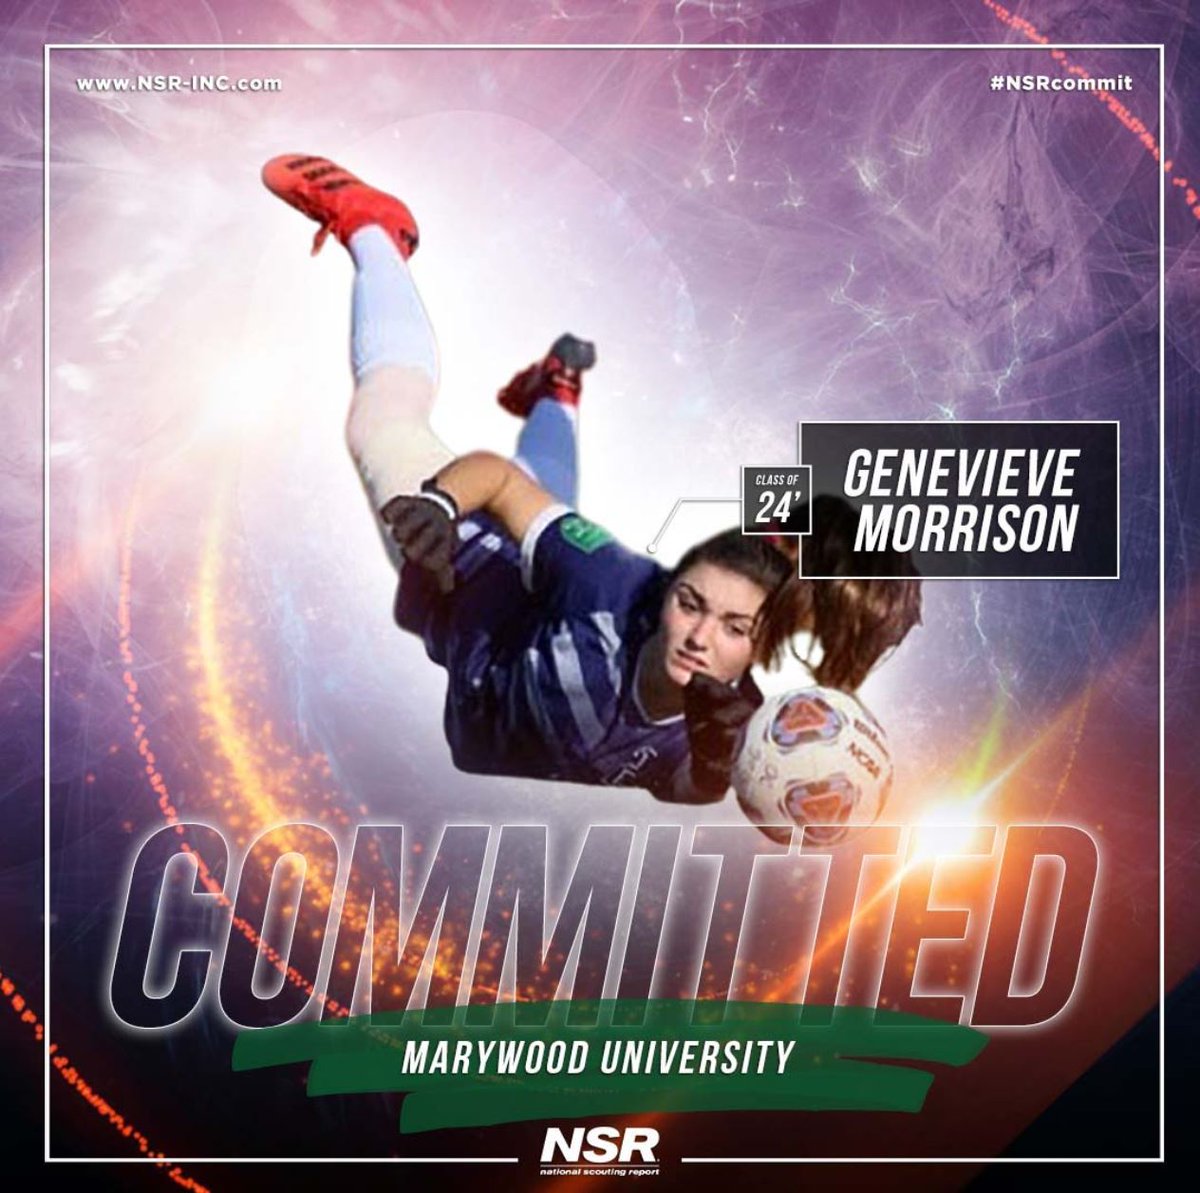 Congrats to 2024 #NSRsoccer Genevieve Morrison Committing to @marywooduniversity!👍⚽️
#NSRcommit